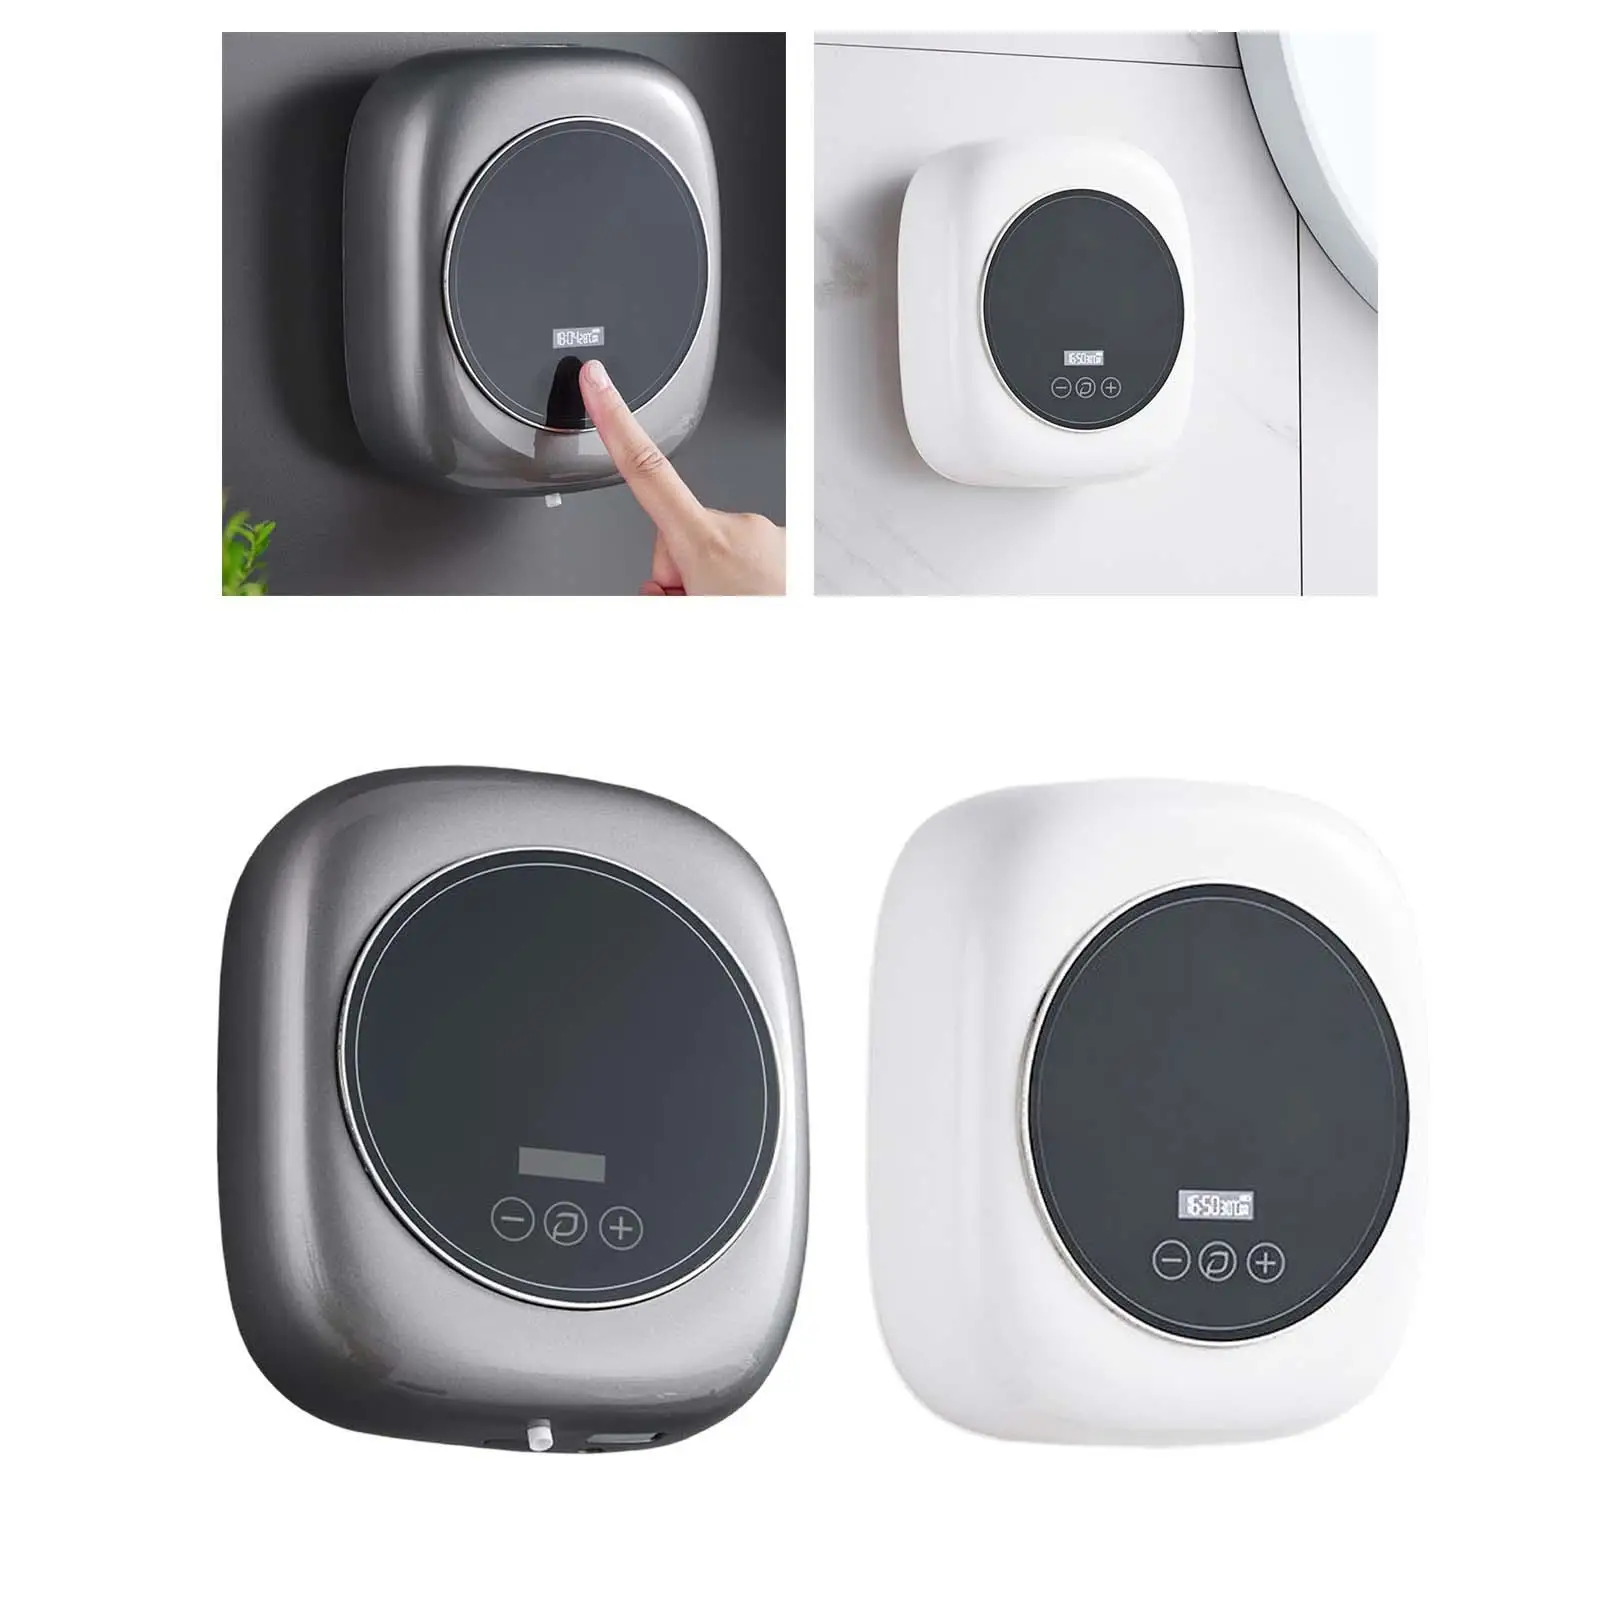 Multipurpose Soap Dispenser USB Rechargeable LCD Display Washing Hand Machine Wall Mounted Touchless for Restaurant Kitchen